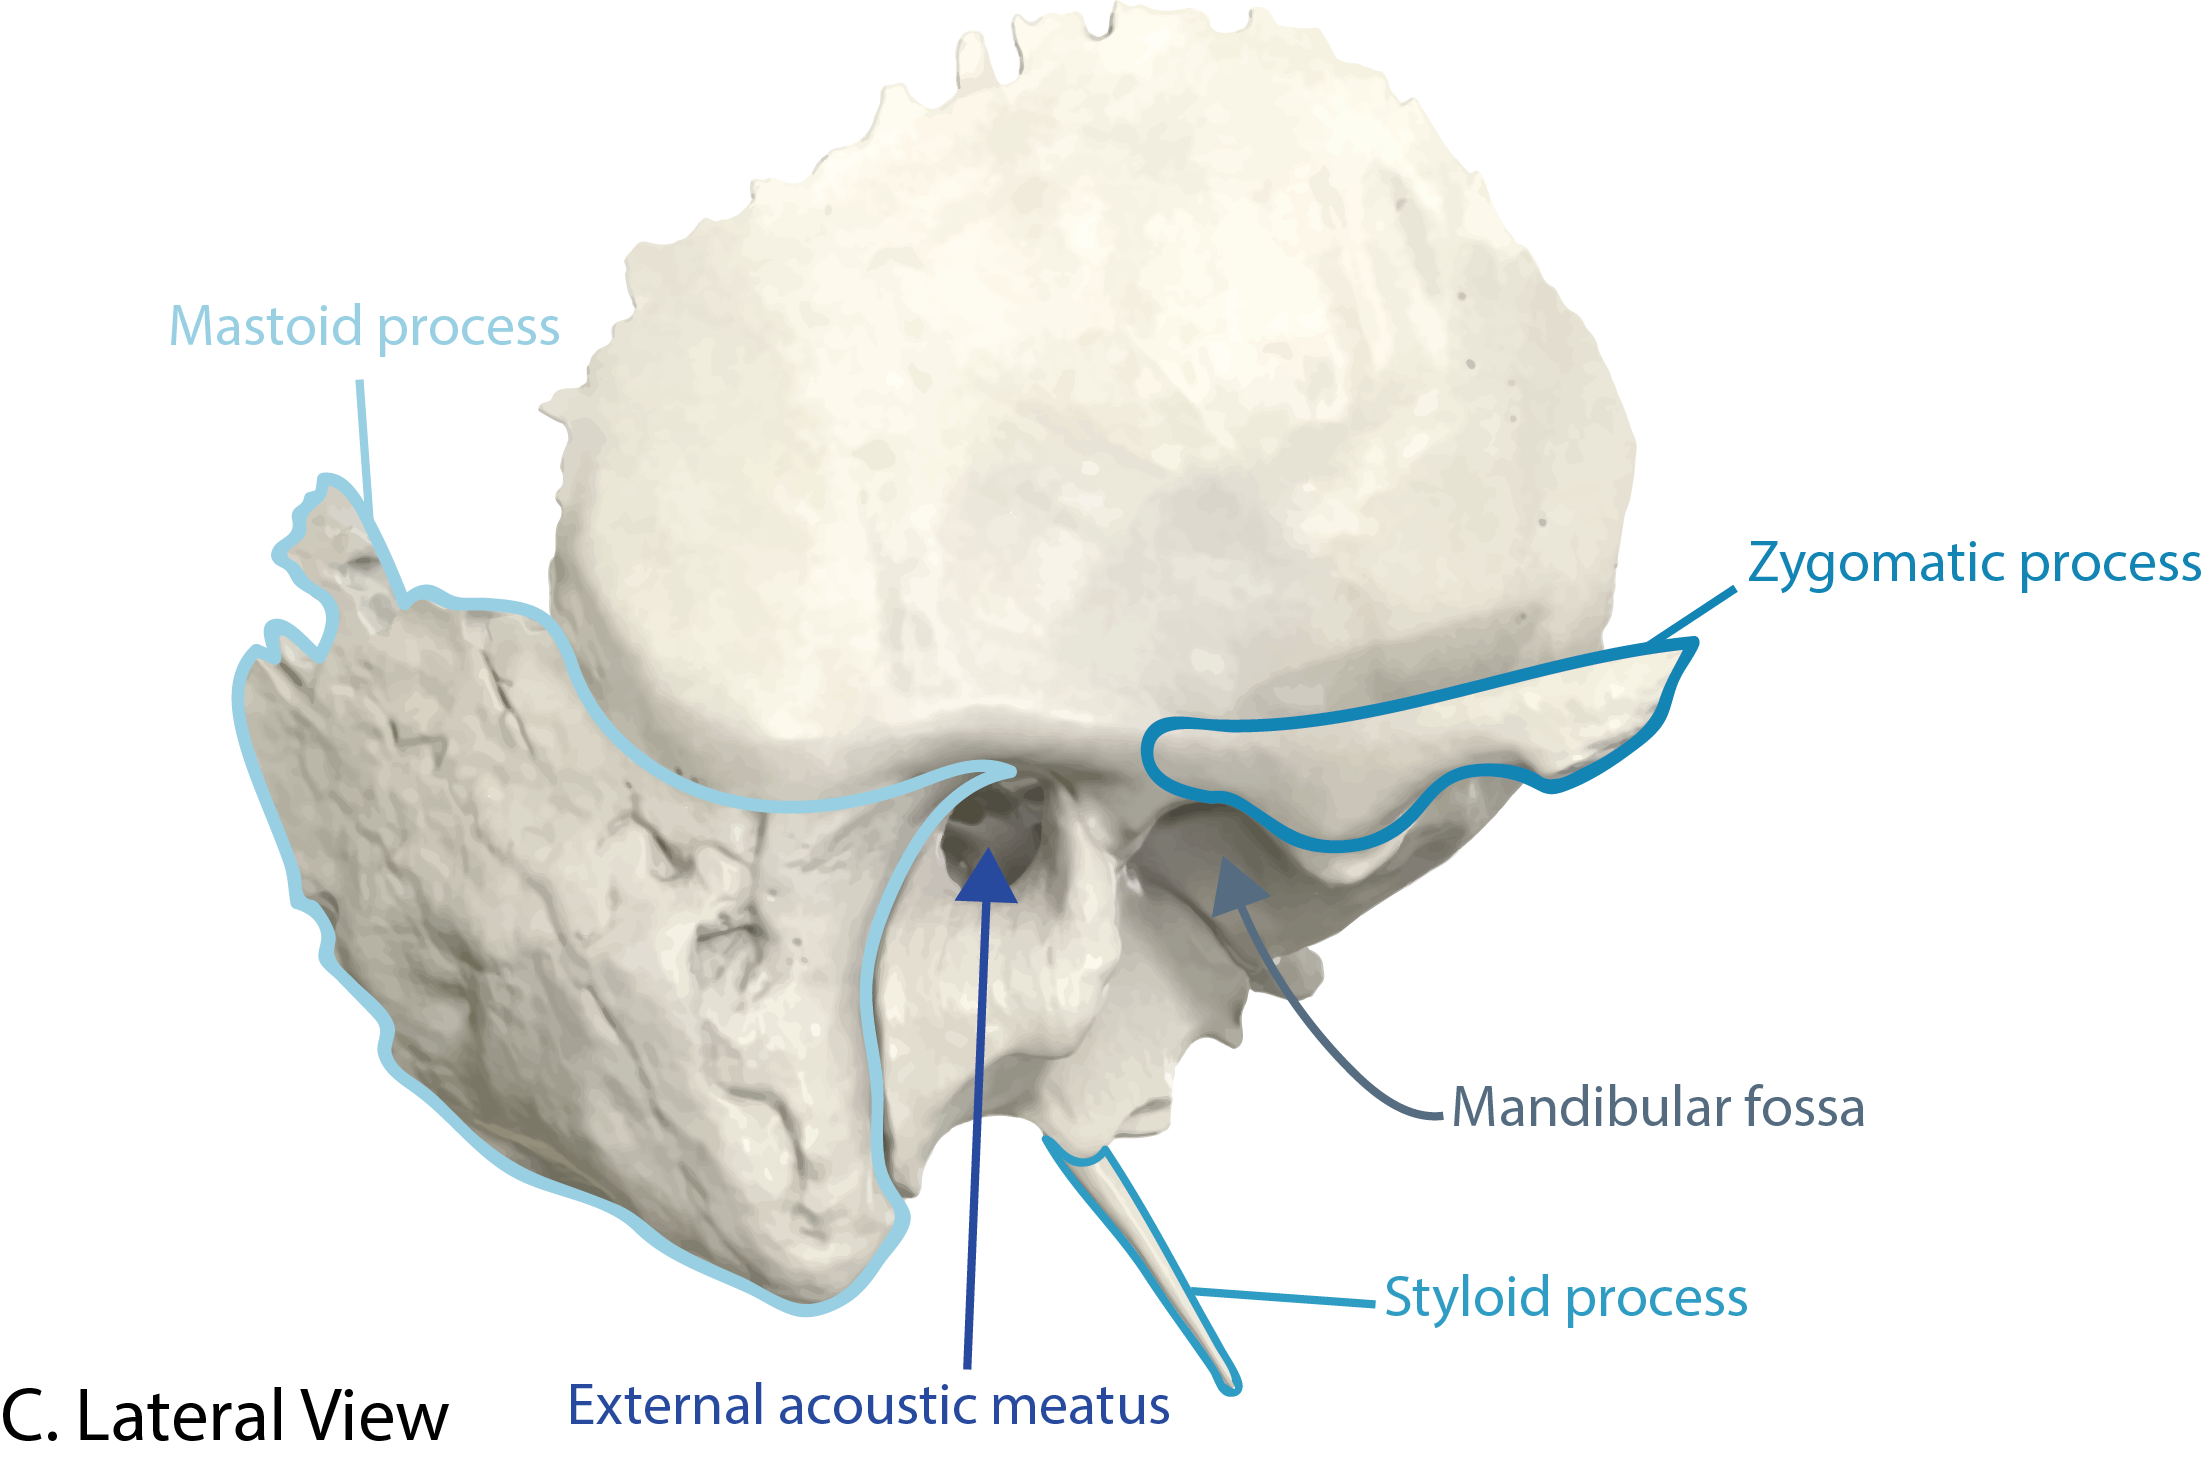 Temporal Bone Lateral View with Landmarks Labeled